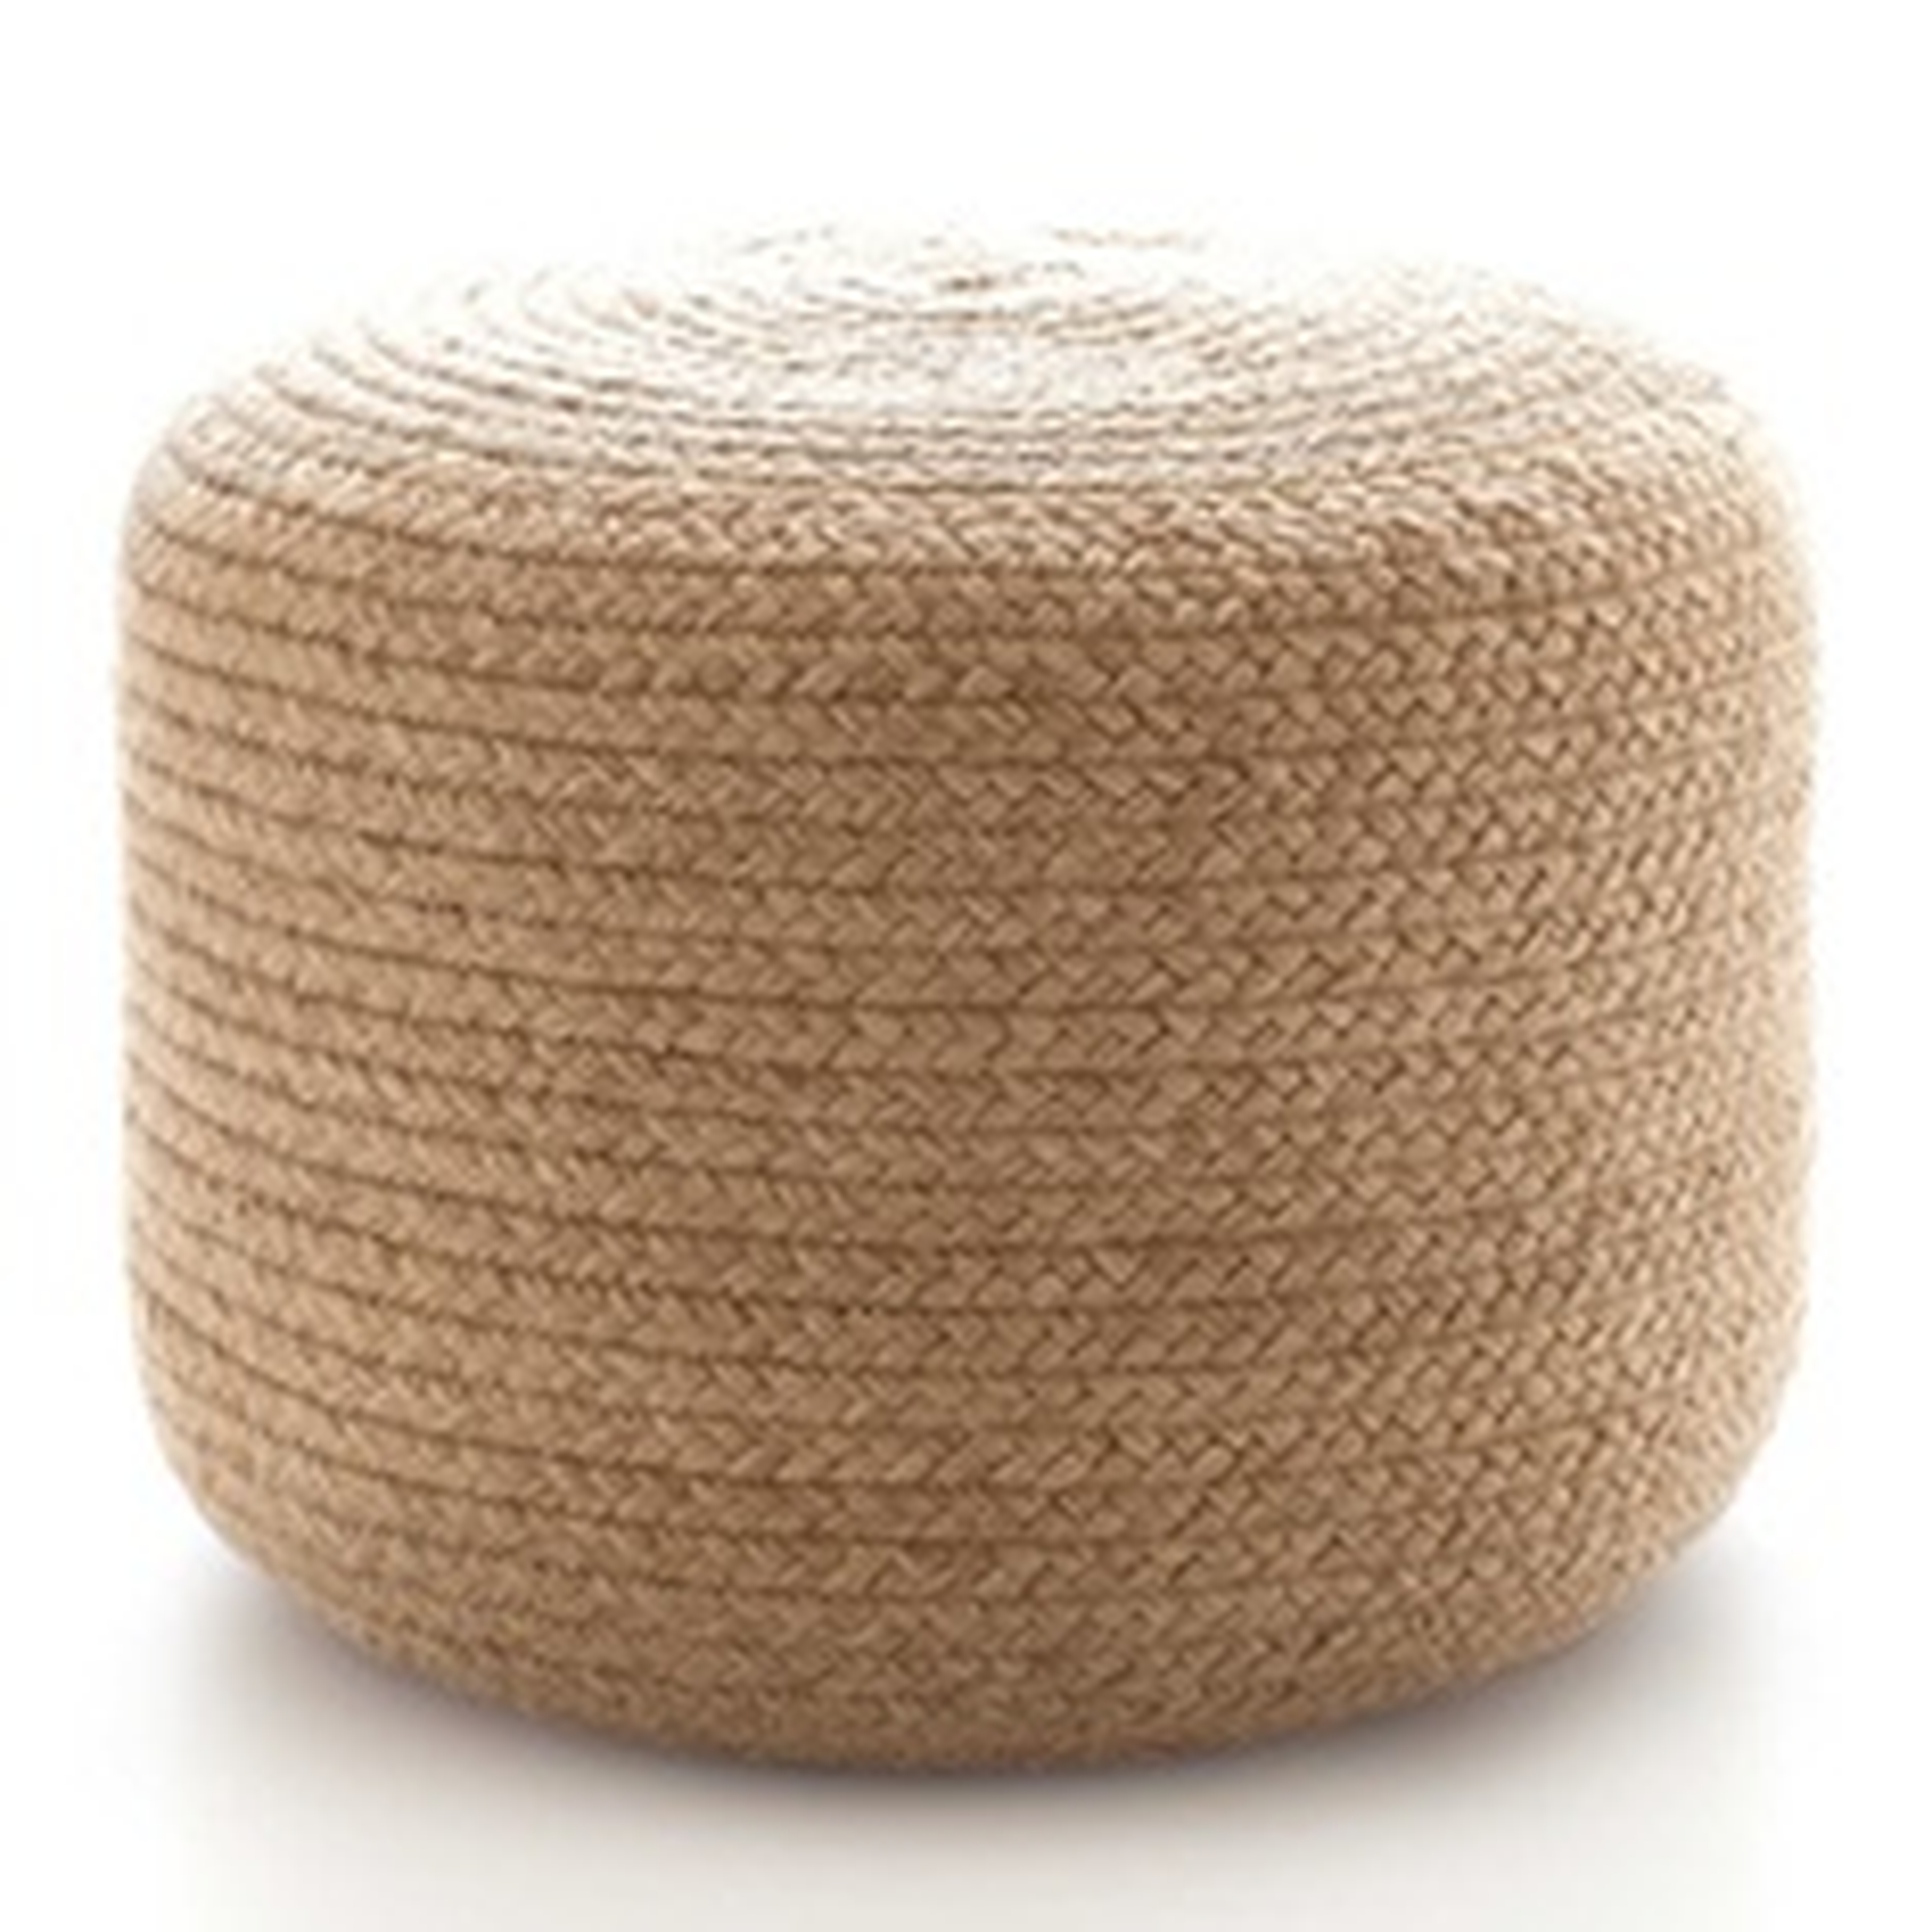 Braided Natural Indoor/Outdoor Pouf - Large - Dash and Albert